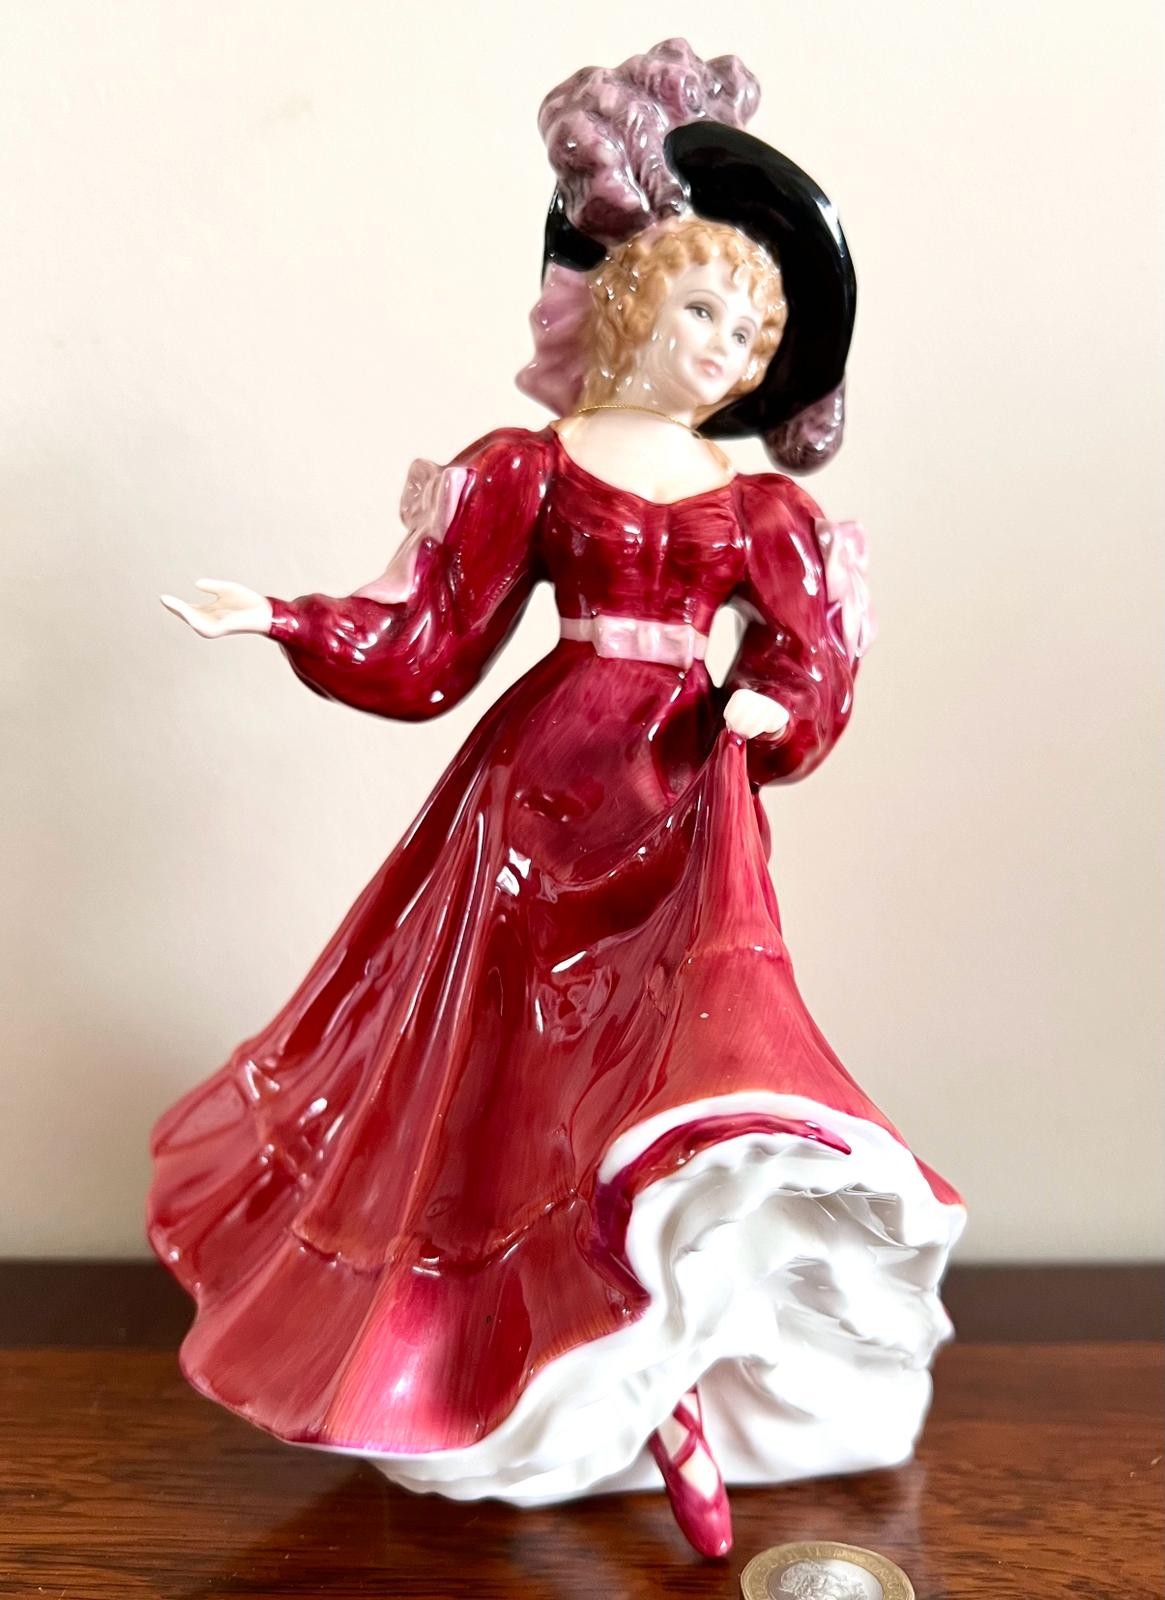 ROYAL DOULTON FIGURE PATRICIA HN3365, MODELLED BY VALERIE ALLAND, FIGURE OF THE YEAR 1993